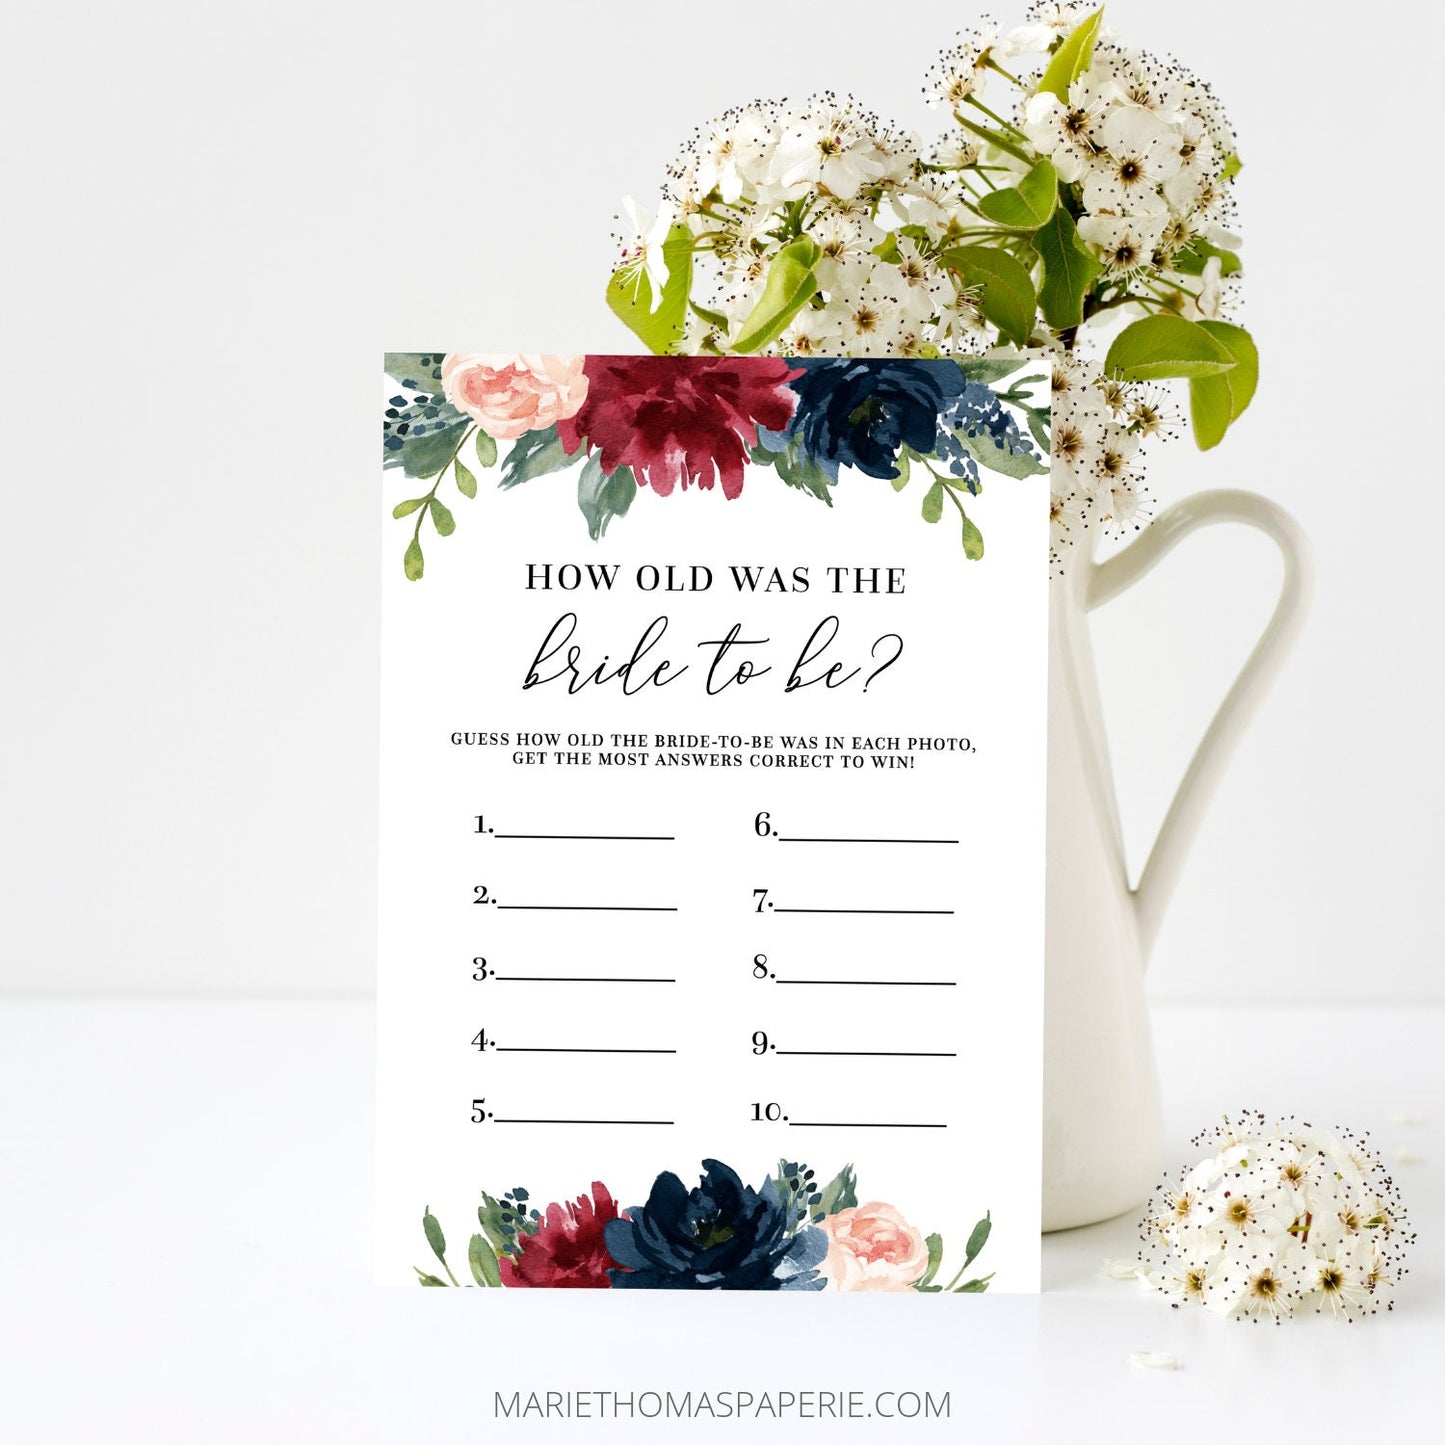 Editable How Old Was the Bride Bridal Shower Games Guess the Age of the Bride Burgundy Template